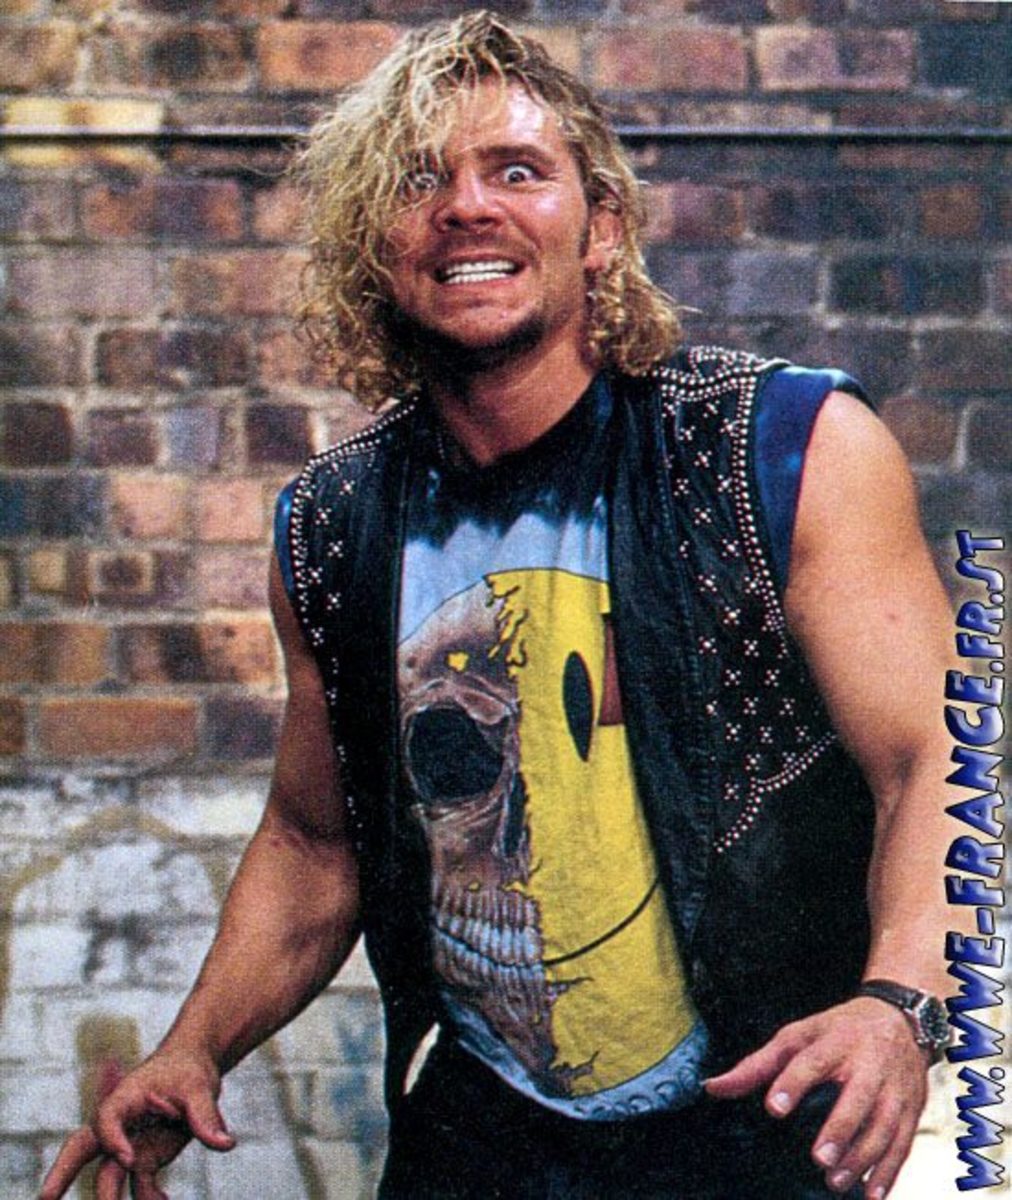 XWL.com Exclusive.  Halloween night and the return of the Promised Prince. Brian-pillman